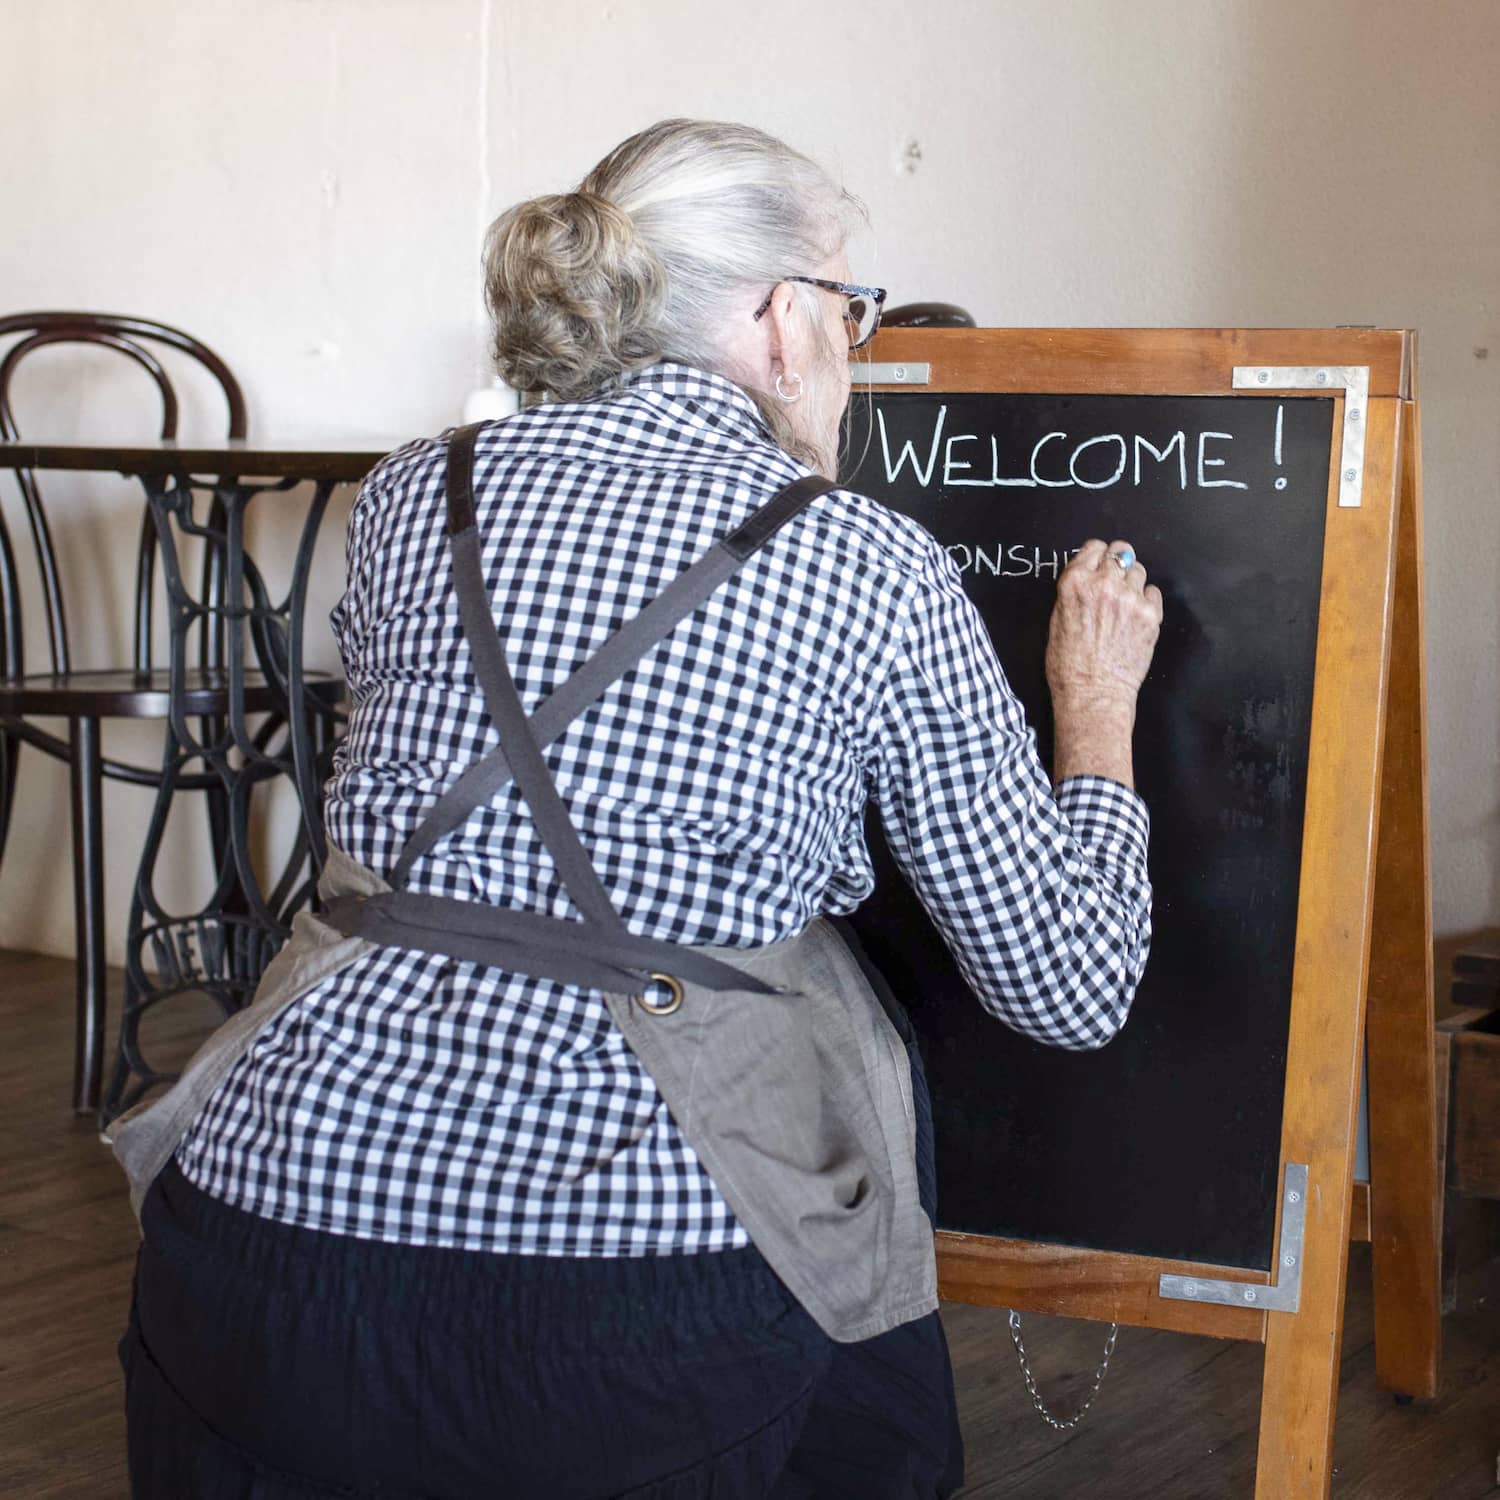 Staff member writing 'Welcome' on an A-board